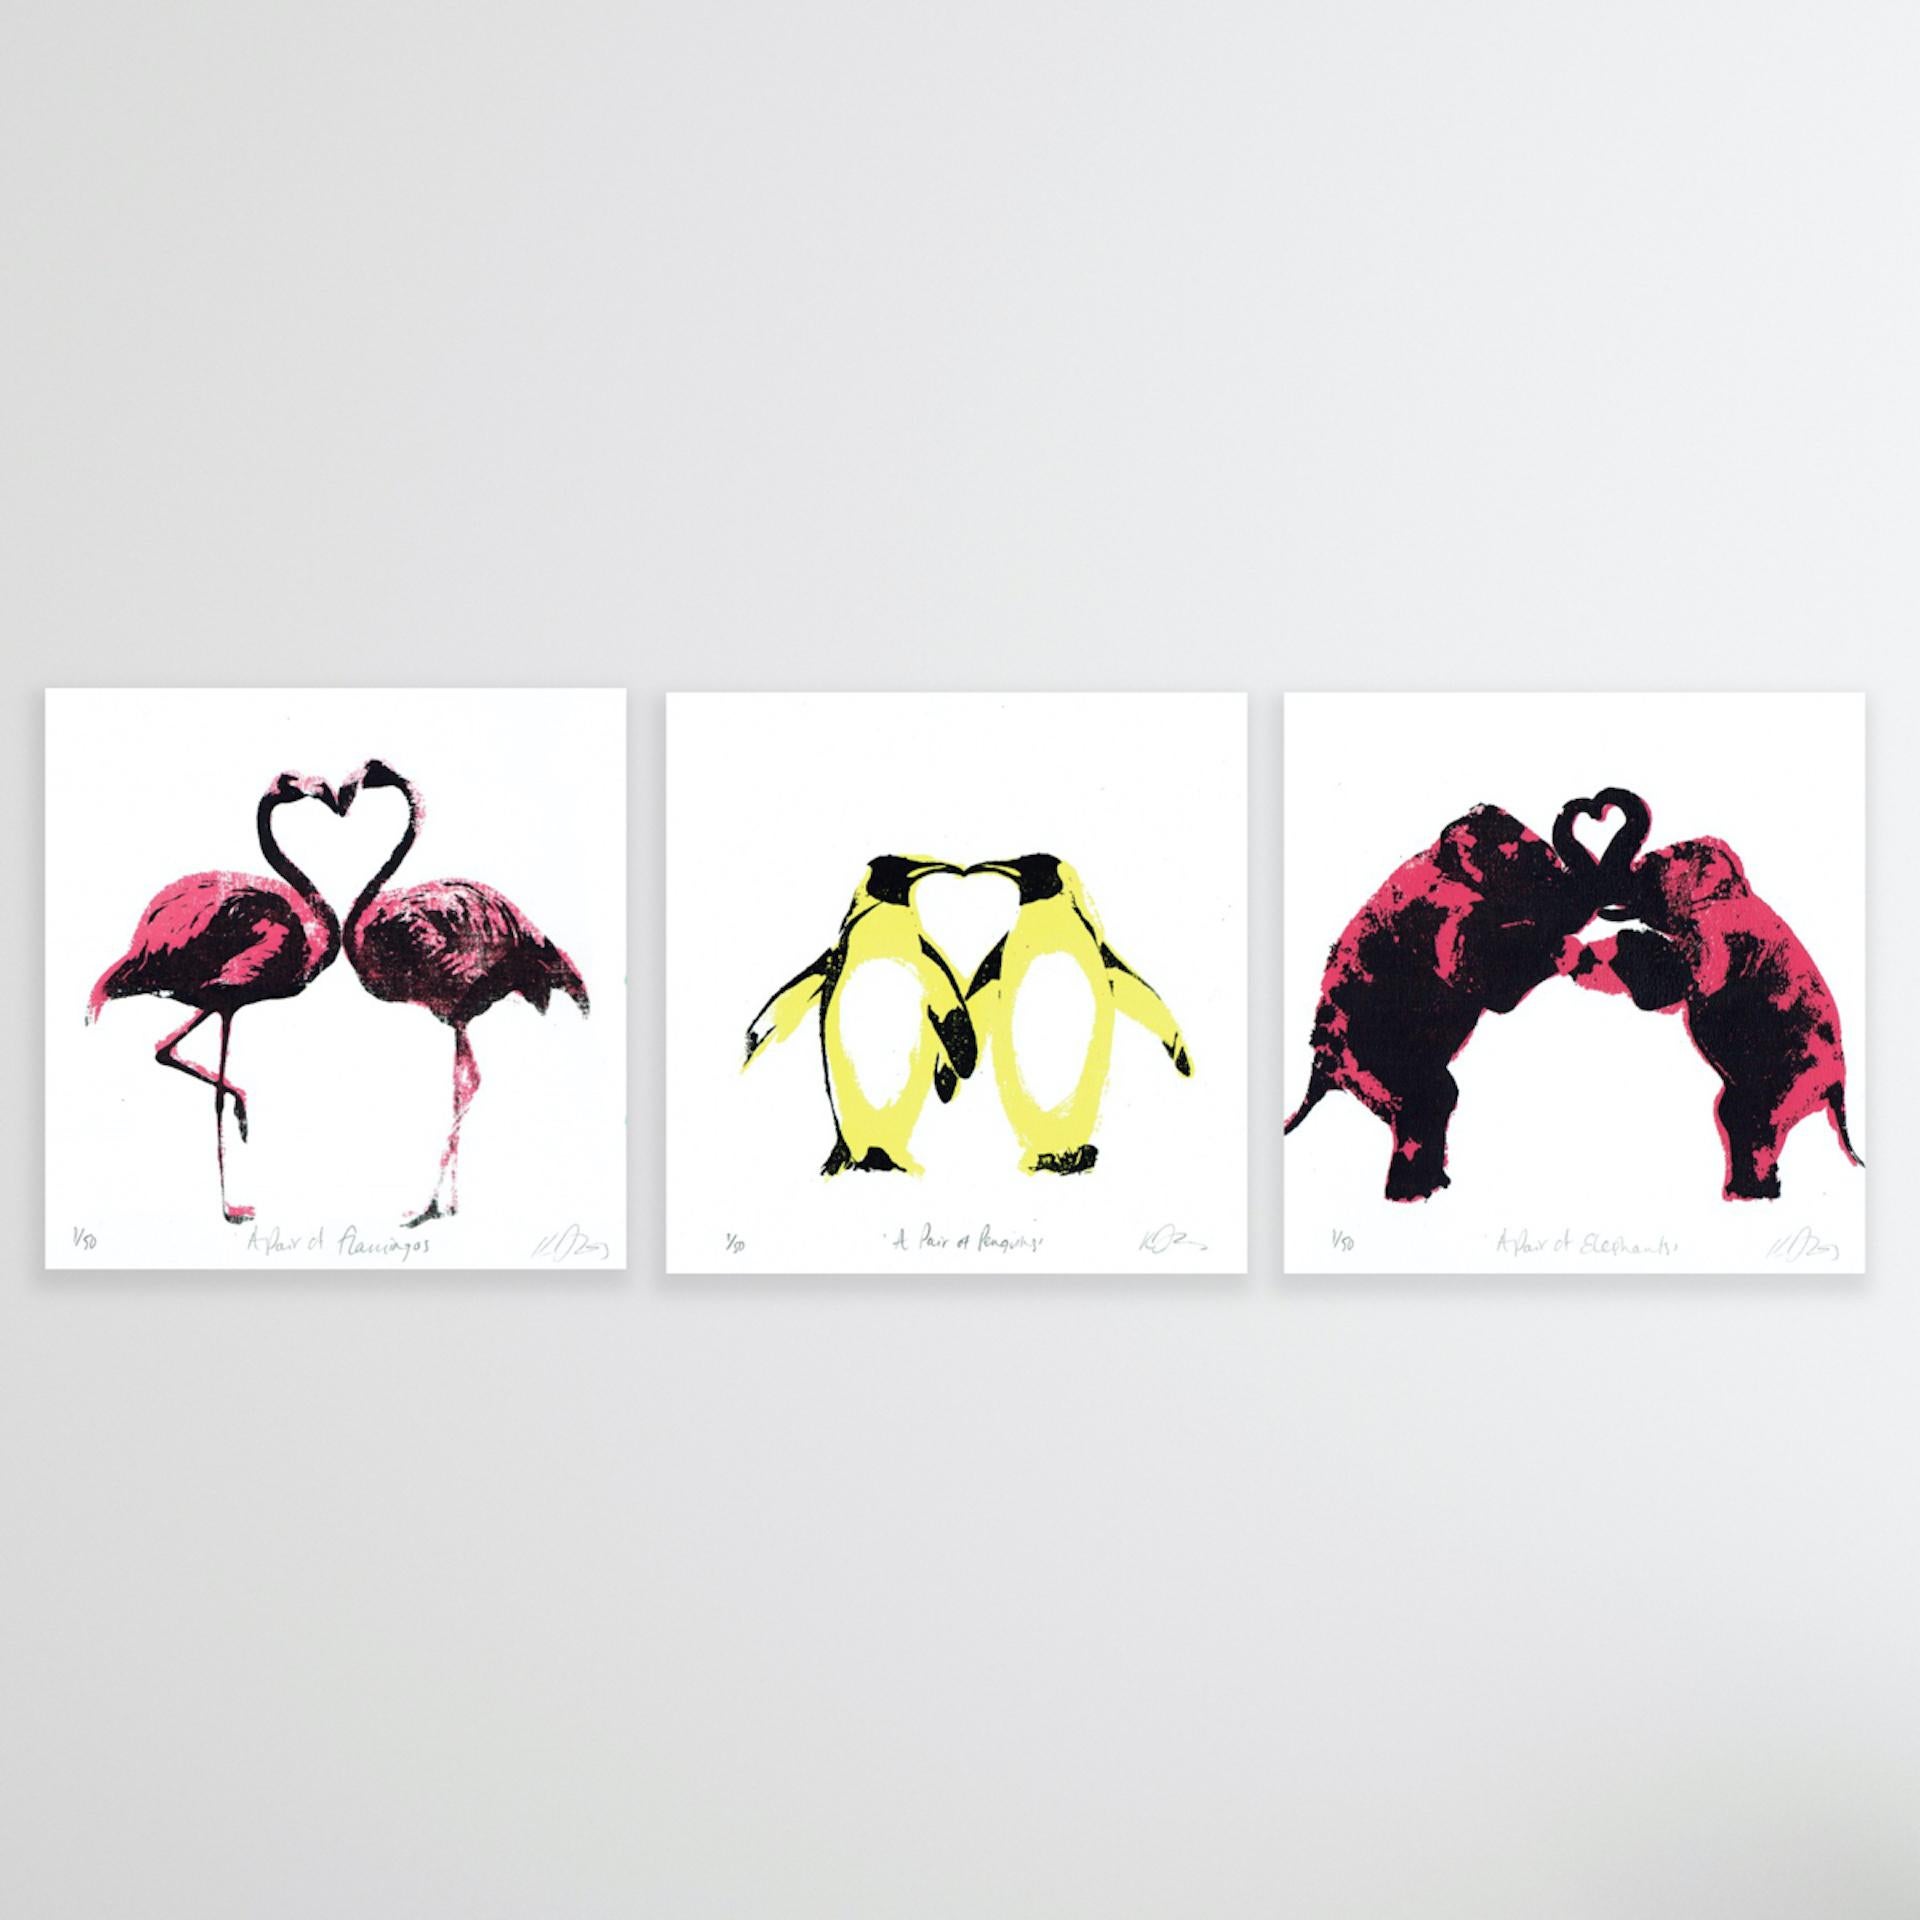 A Pair Of Animals Triptych by Katie Edwards

Consists of
A Pair Of Flamingos
A Pair Of Penguins
A Pair Of Elephants

Each piece is individually £50
Sold unmounted and unframed

Each piece is individually H20cm x W20cm x D0.2cm

Minimum wall space